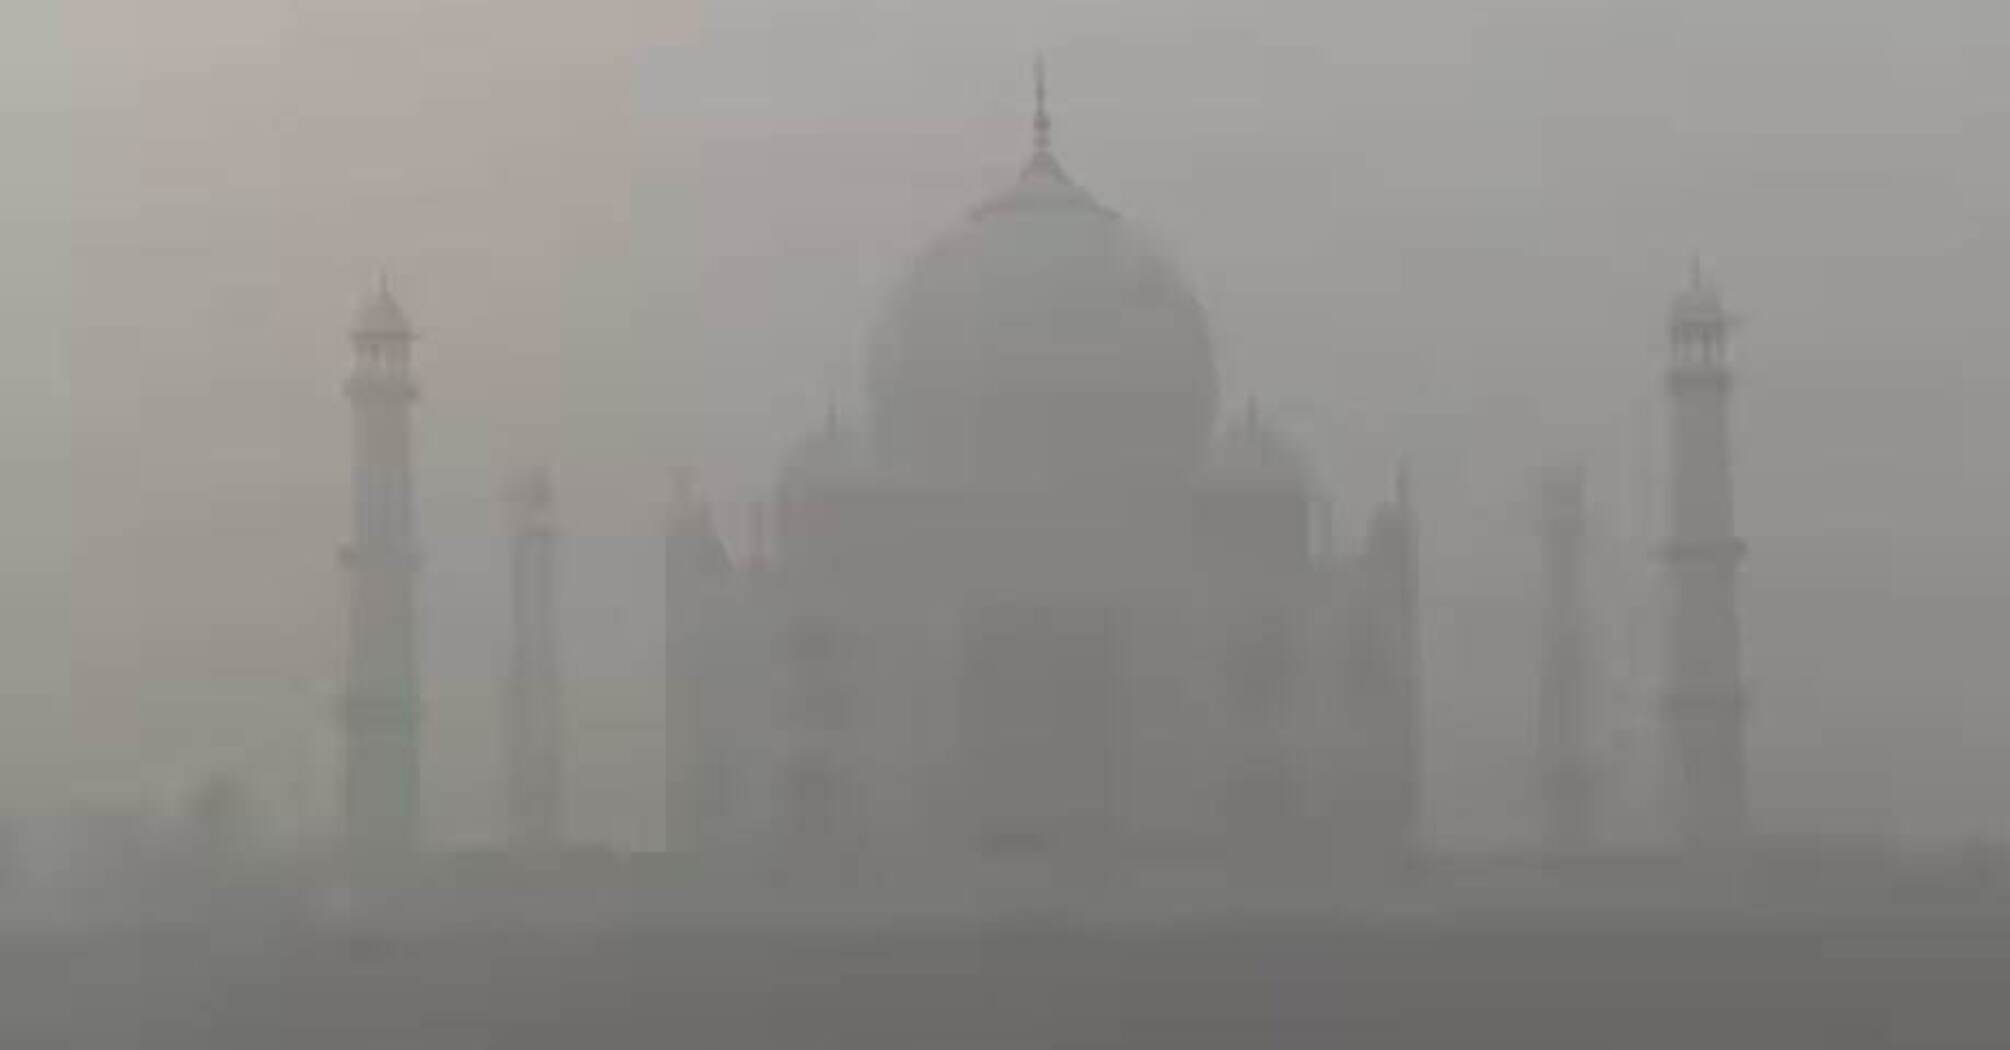 Taj Mahal in the fog: Tourists are disappointed with the spoiled view